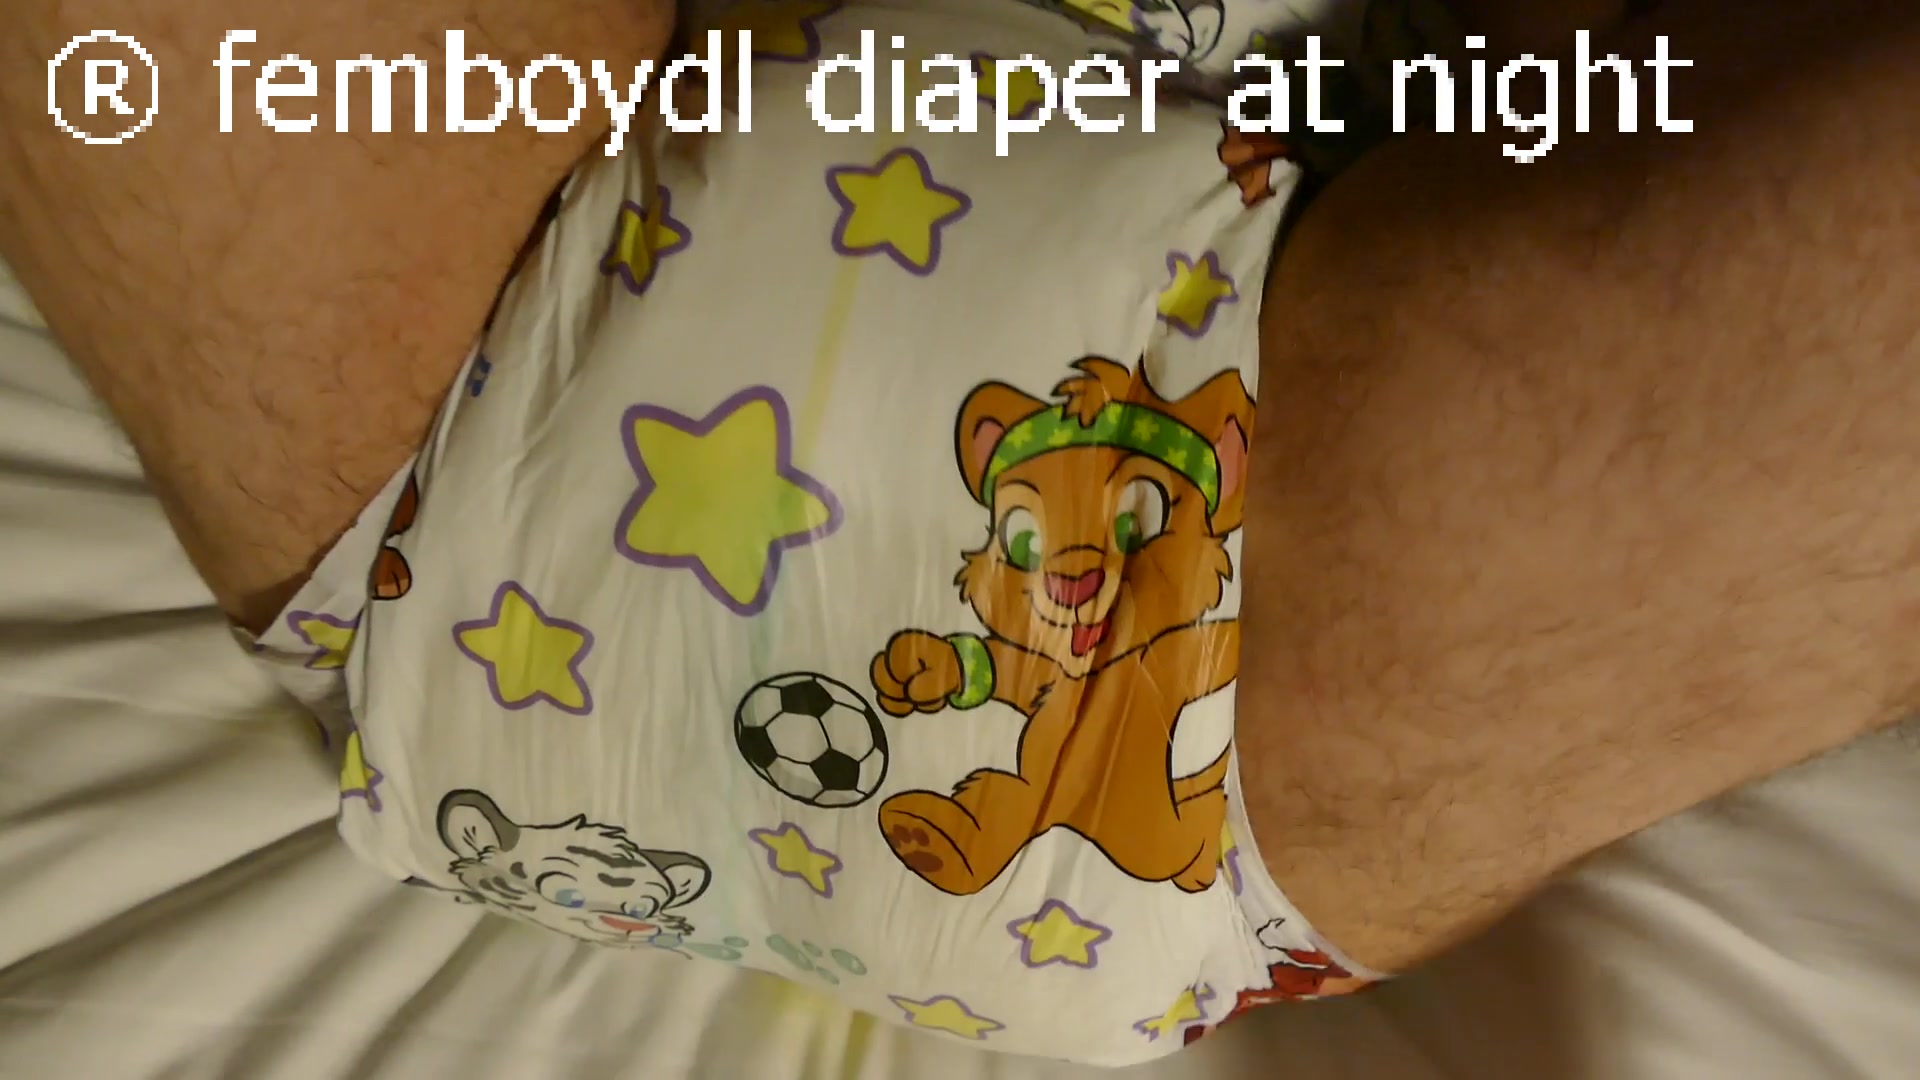 woke up in the middle of the night - wet my cute crinklz diaper